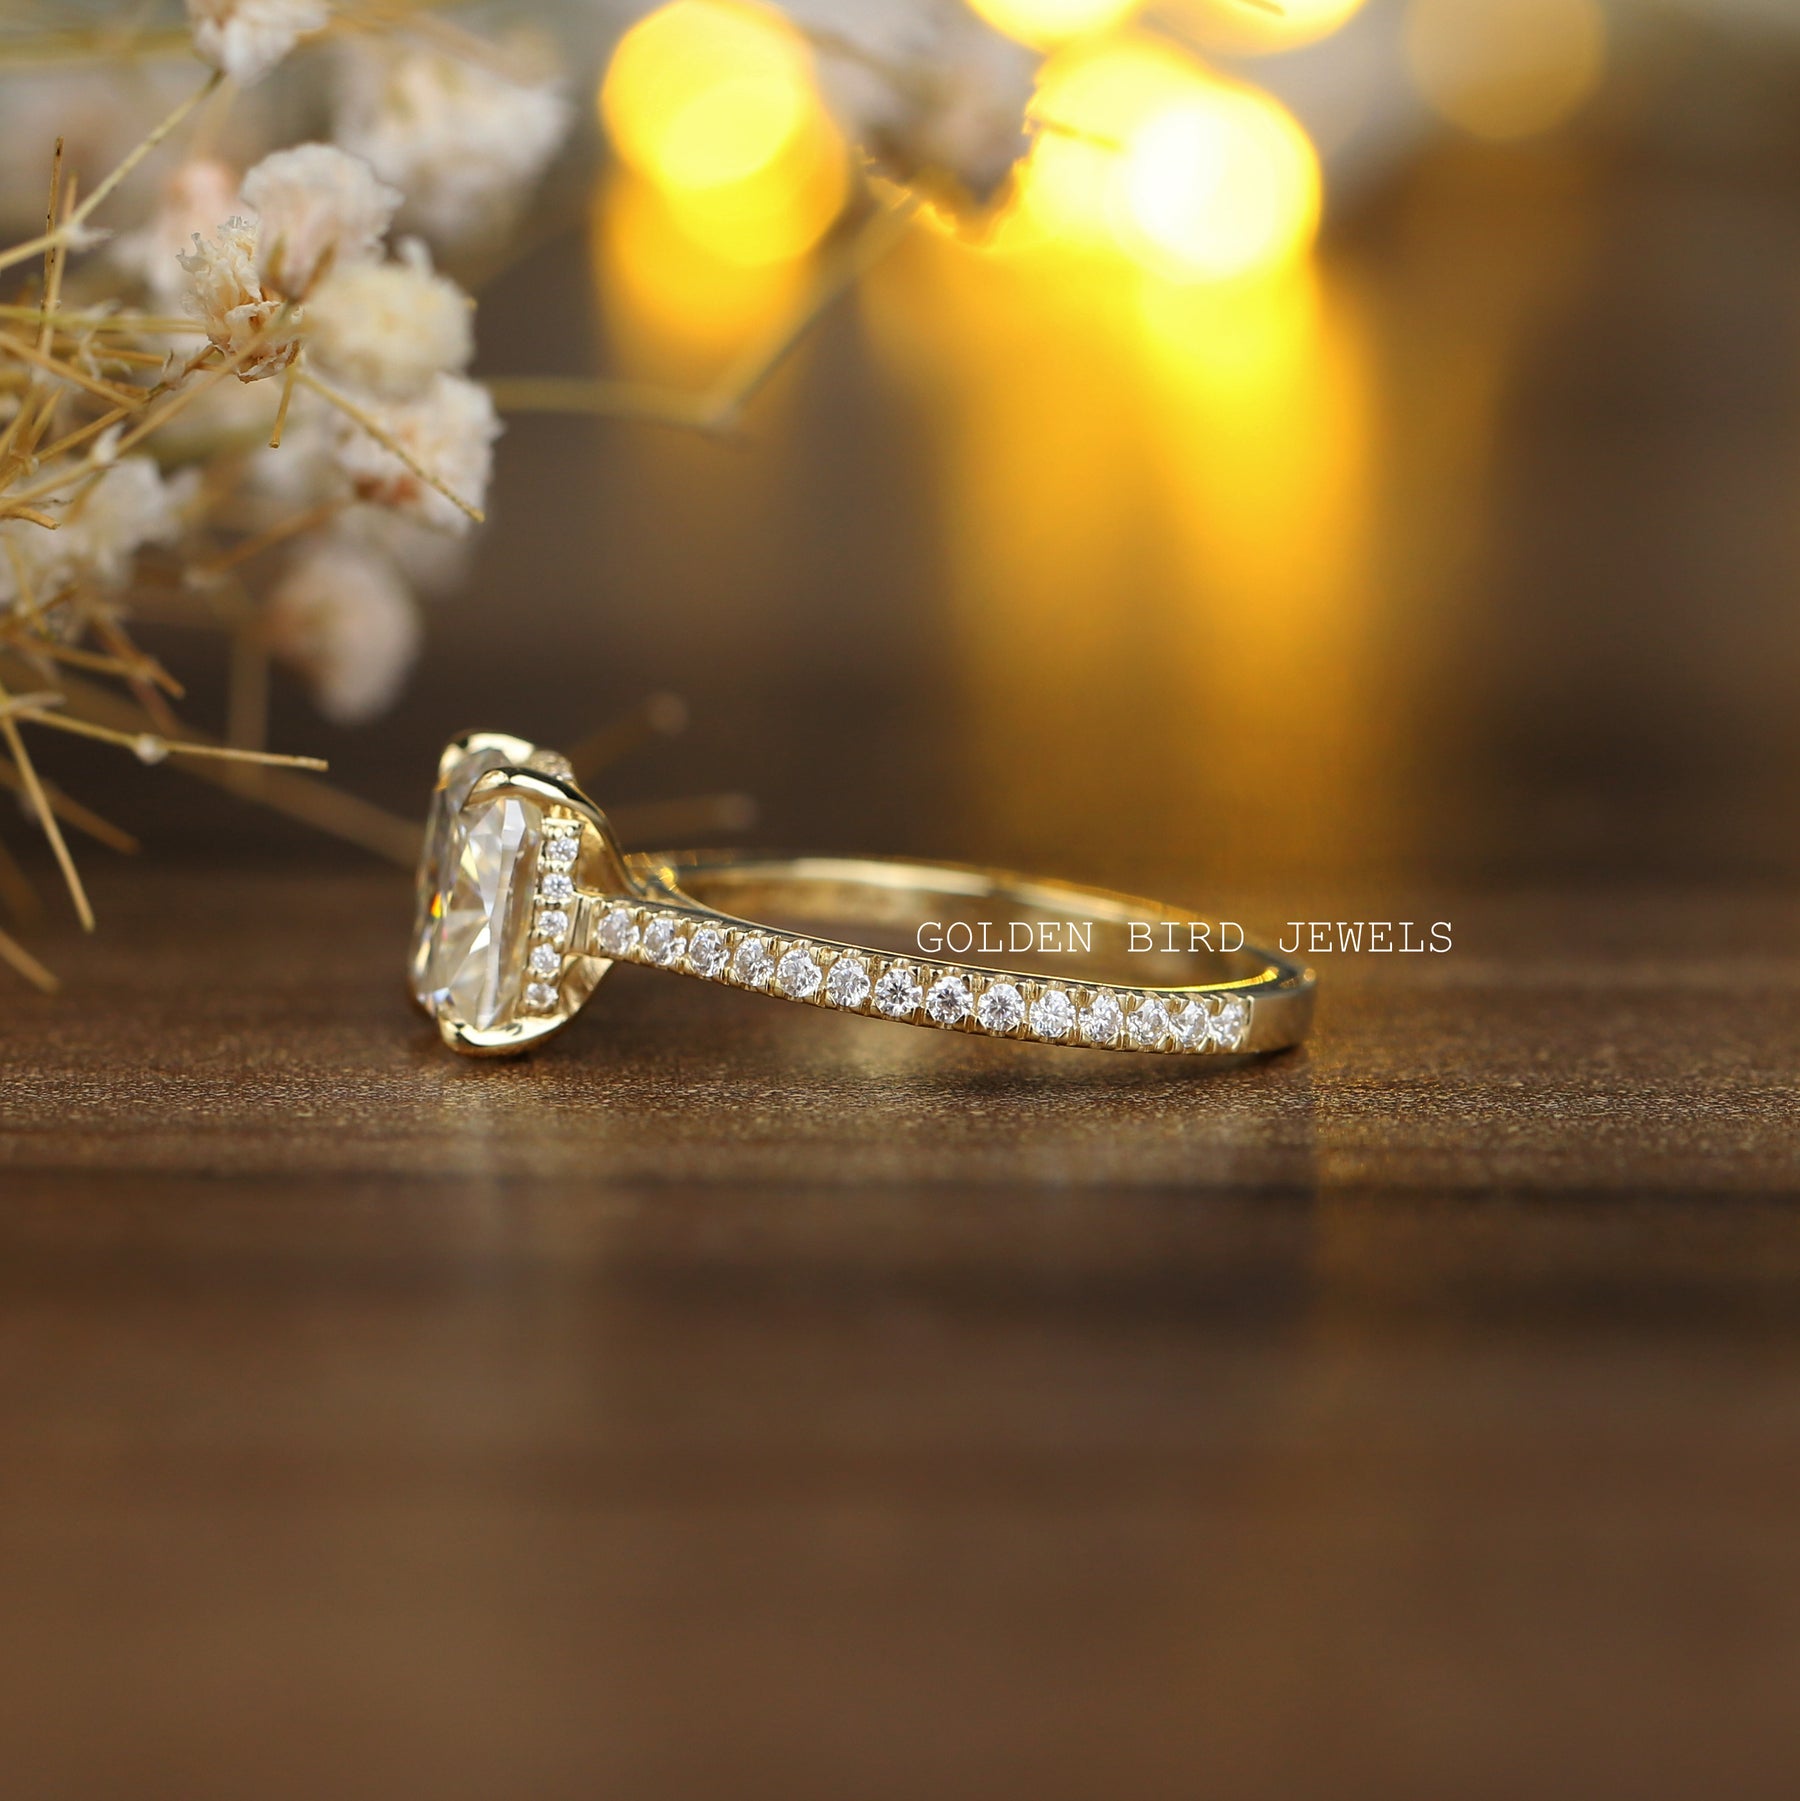 [Side View Of Cushion Cut Moissanite Solitaire Engagement Ring]-[Golden Bird Jewels]